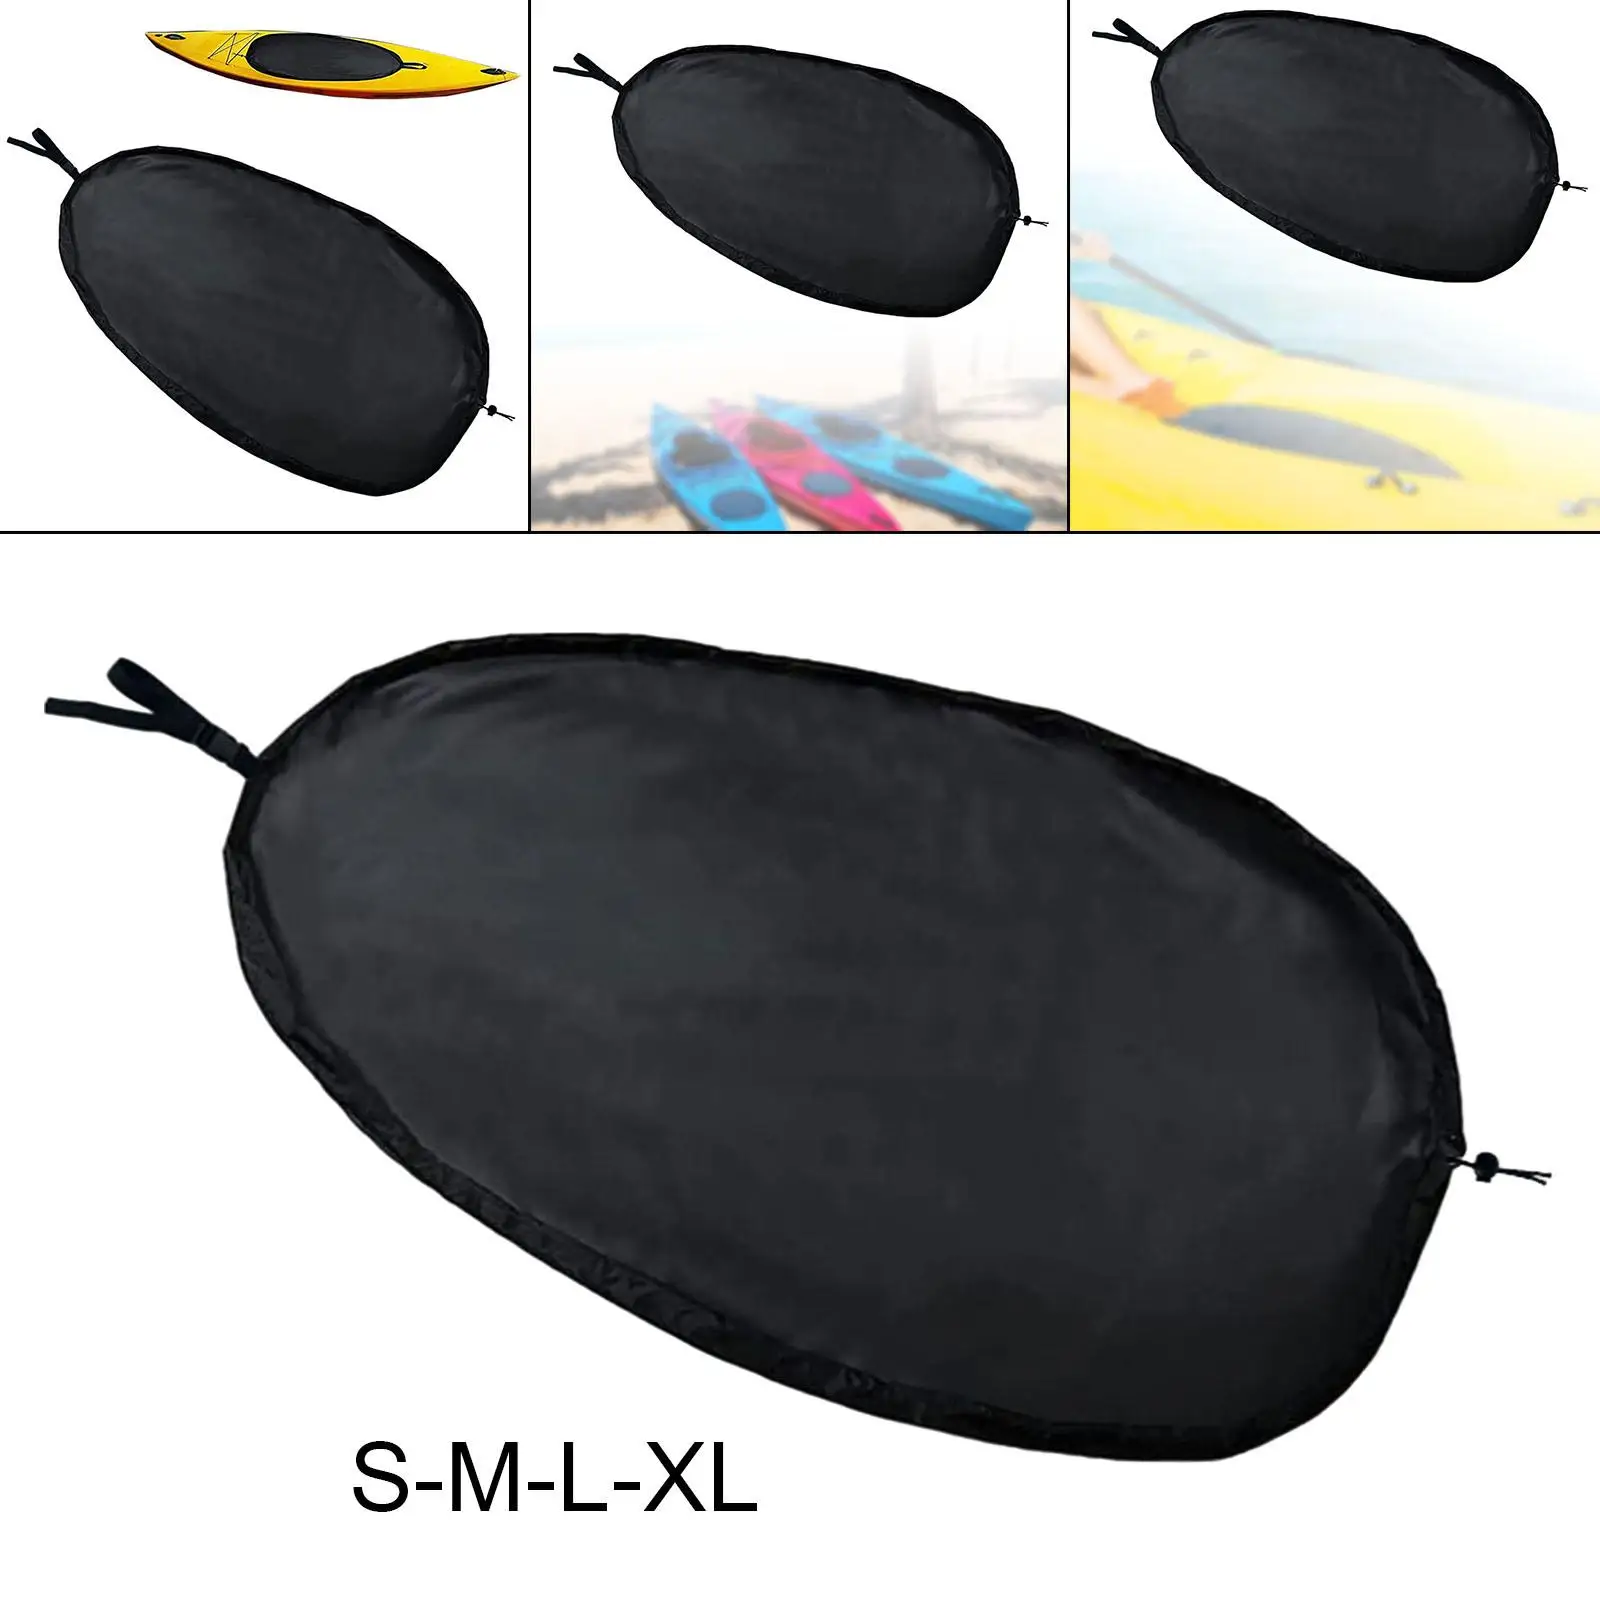 Cockpit cover for professional kayak Adjustable sun protection Water resistance